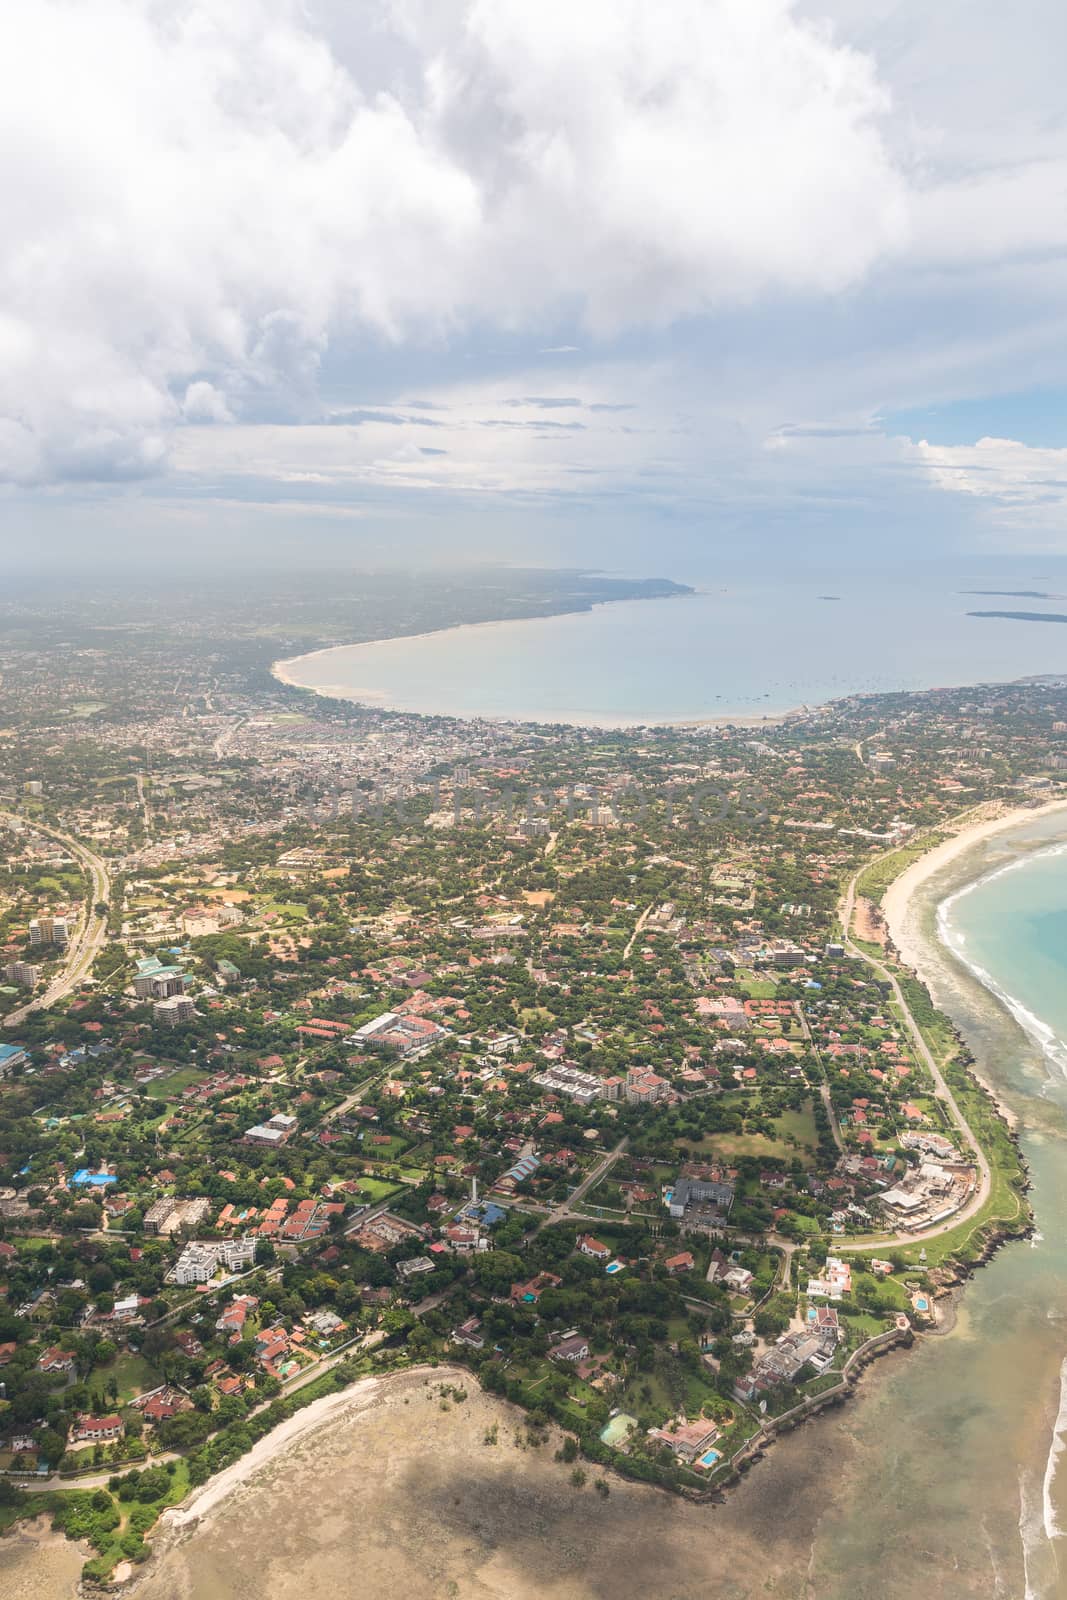 Aerial view of the city of Dar Es Salaam along the shores of the Indian Ocean showing the densely packed buildings